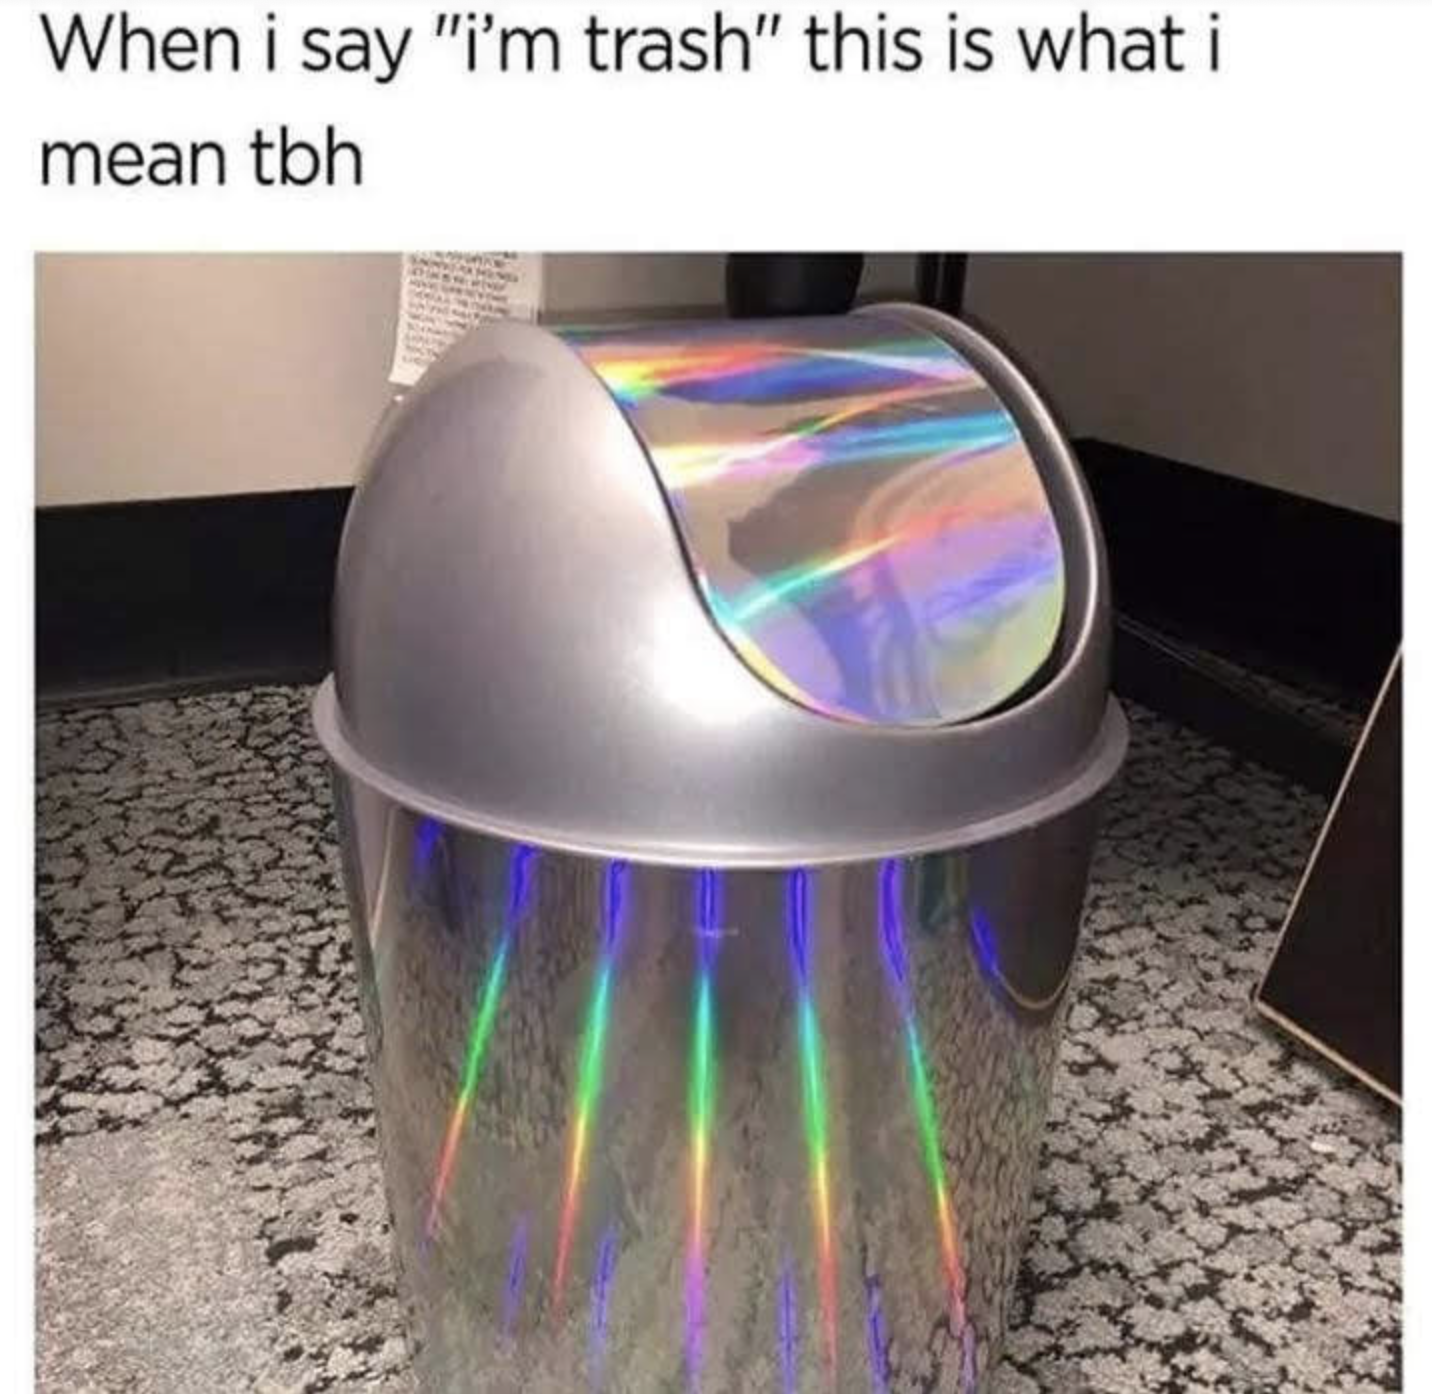 say im trash - When i say "i'm trash" this is what i mean tbh